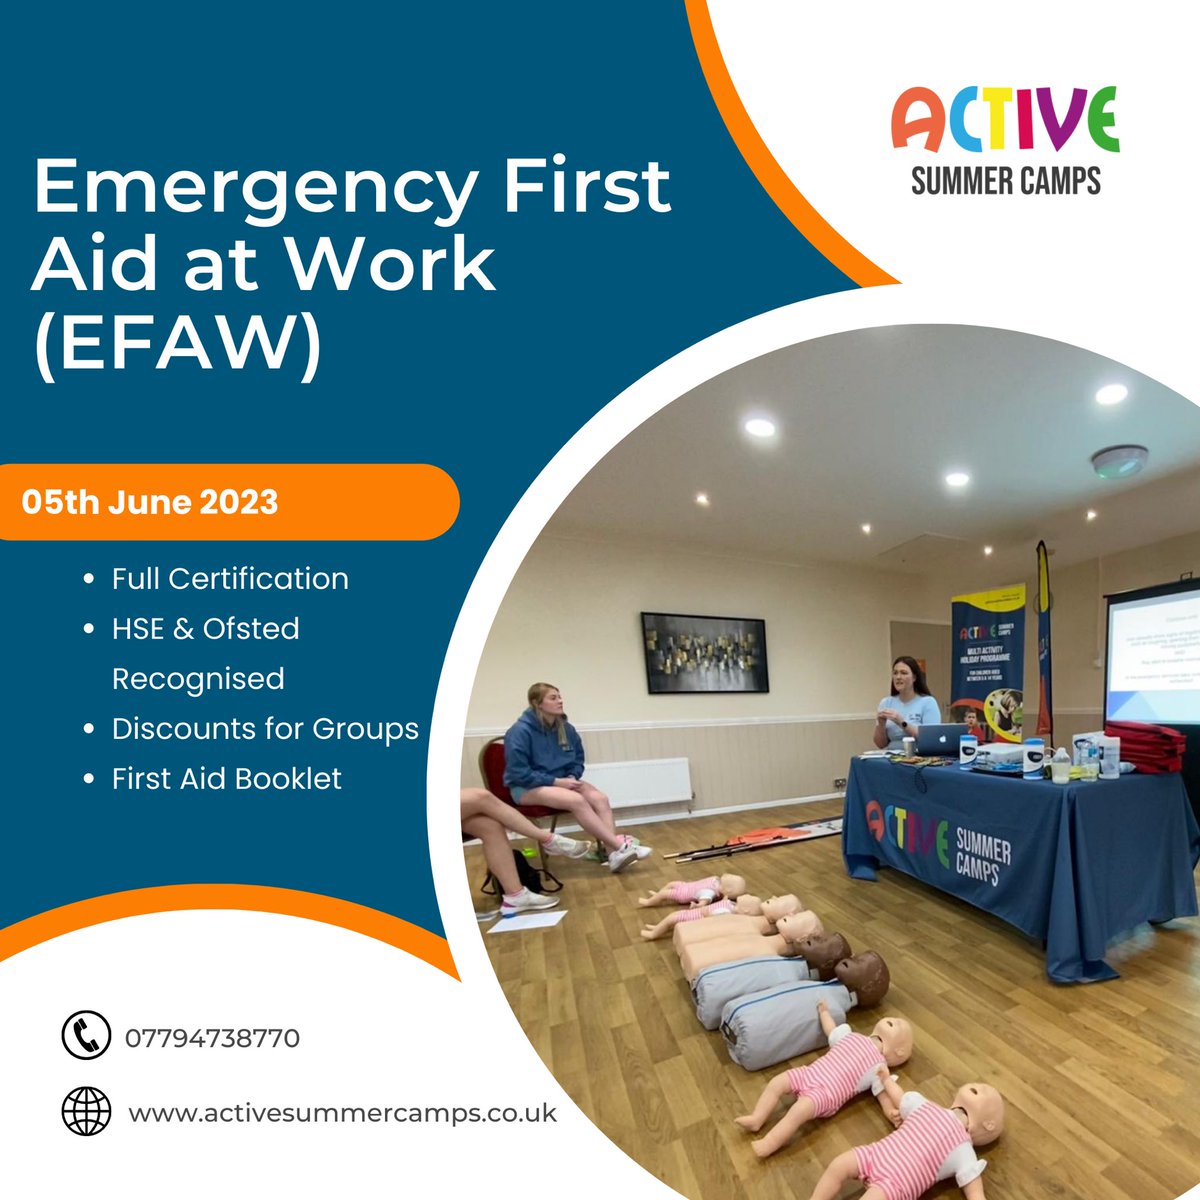 We have a couple of spaces available on our next course;
Level 3 Emergency First Aid at work - 05th June 2023
Have a look at our upcoming courses; 
activesummercamps.co.uk/firstaidtraini…
#firstaidtraining #firstaidcourse #sheffieldbusiness #rotherhambusinesses #sheffieldissuper #barnsleyisbrill